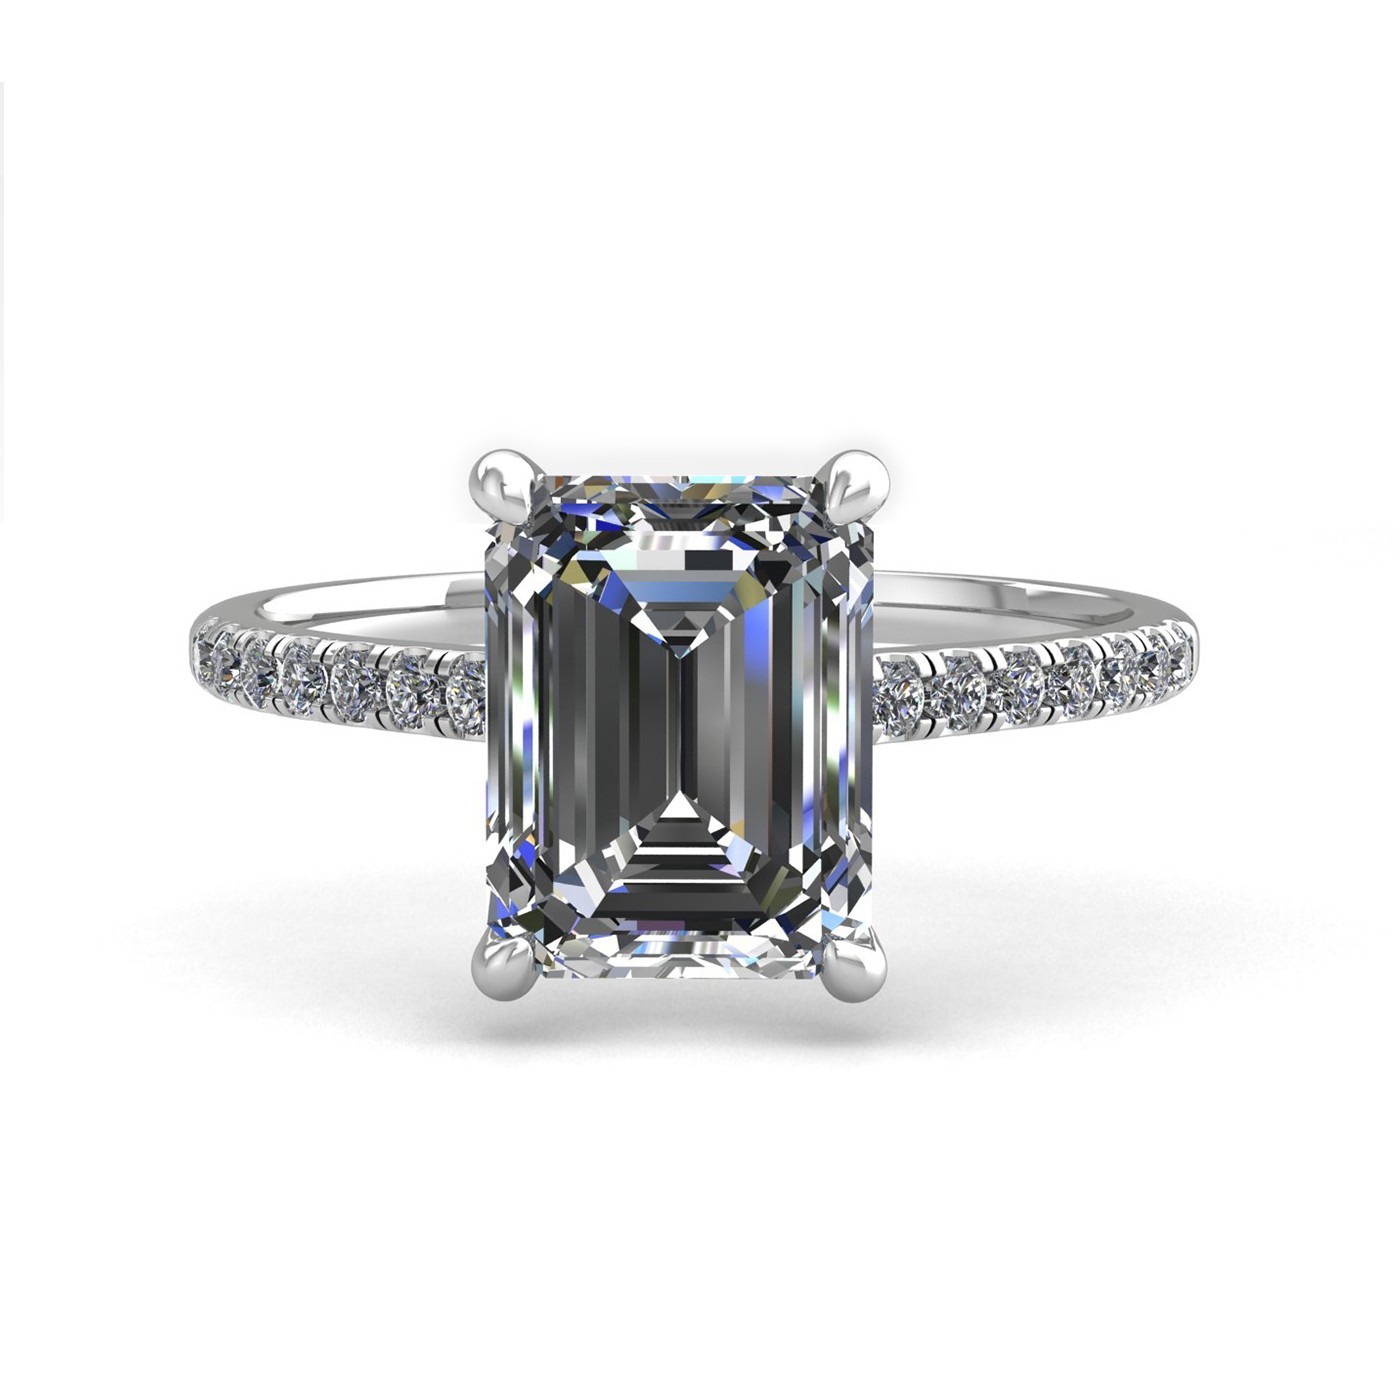 18k white gold 2.0ct 4 prongs emerald cut diamond engagement ring with whisper thin pavÉ set band